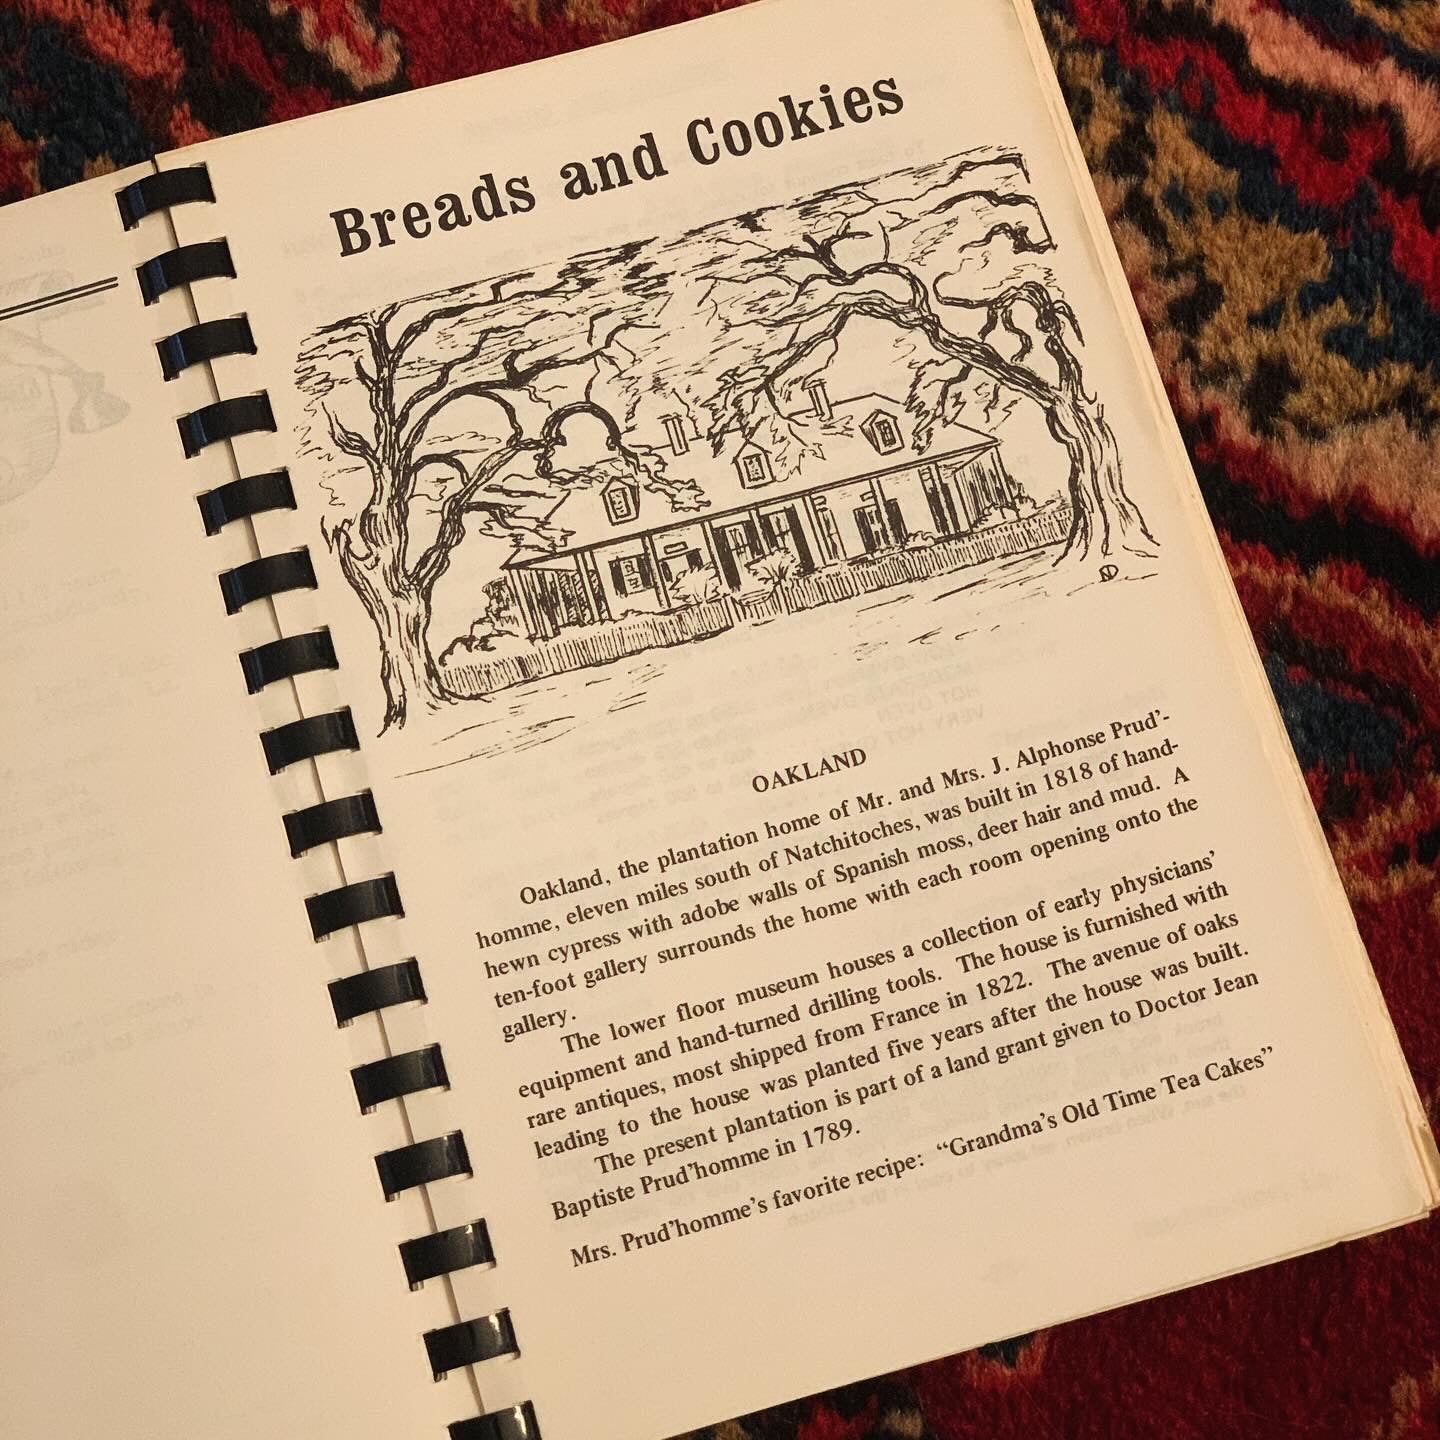 Calico Ladies Cookbook by the Natchitoches Women for the Preservation of Historic Natchitoches (1972)